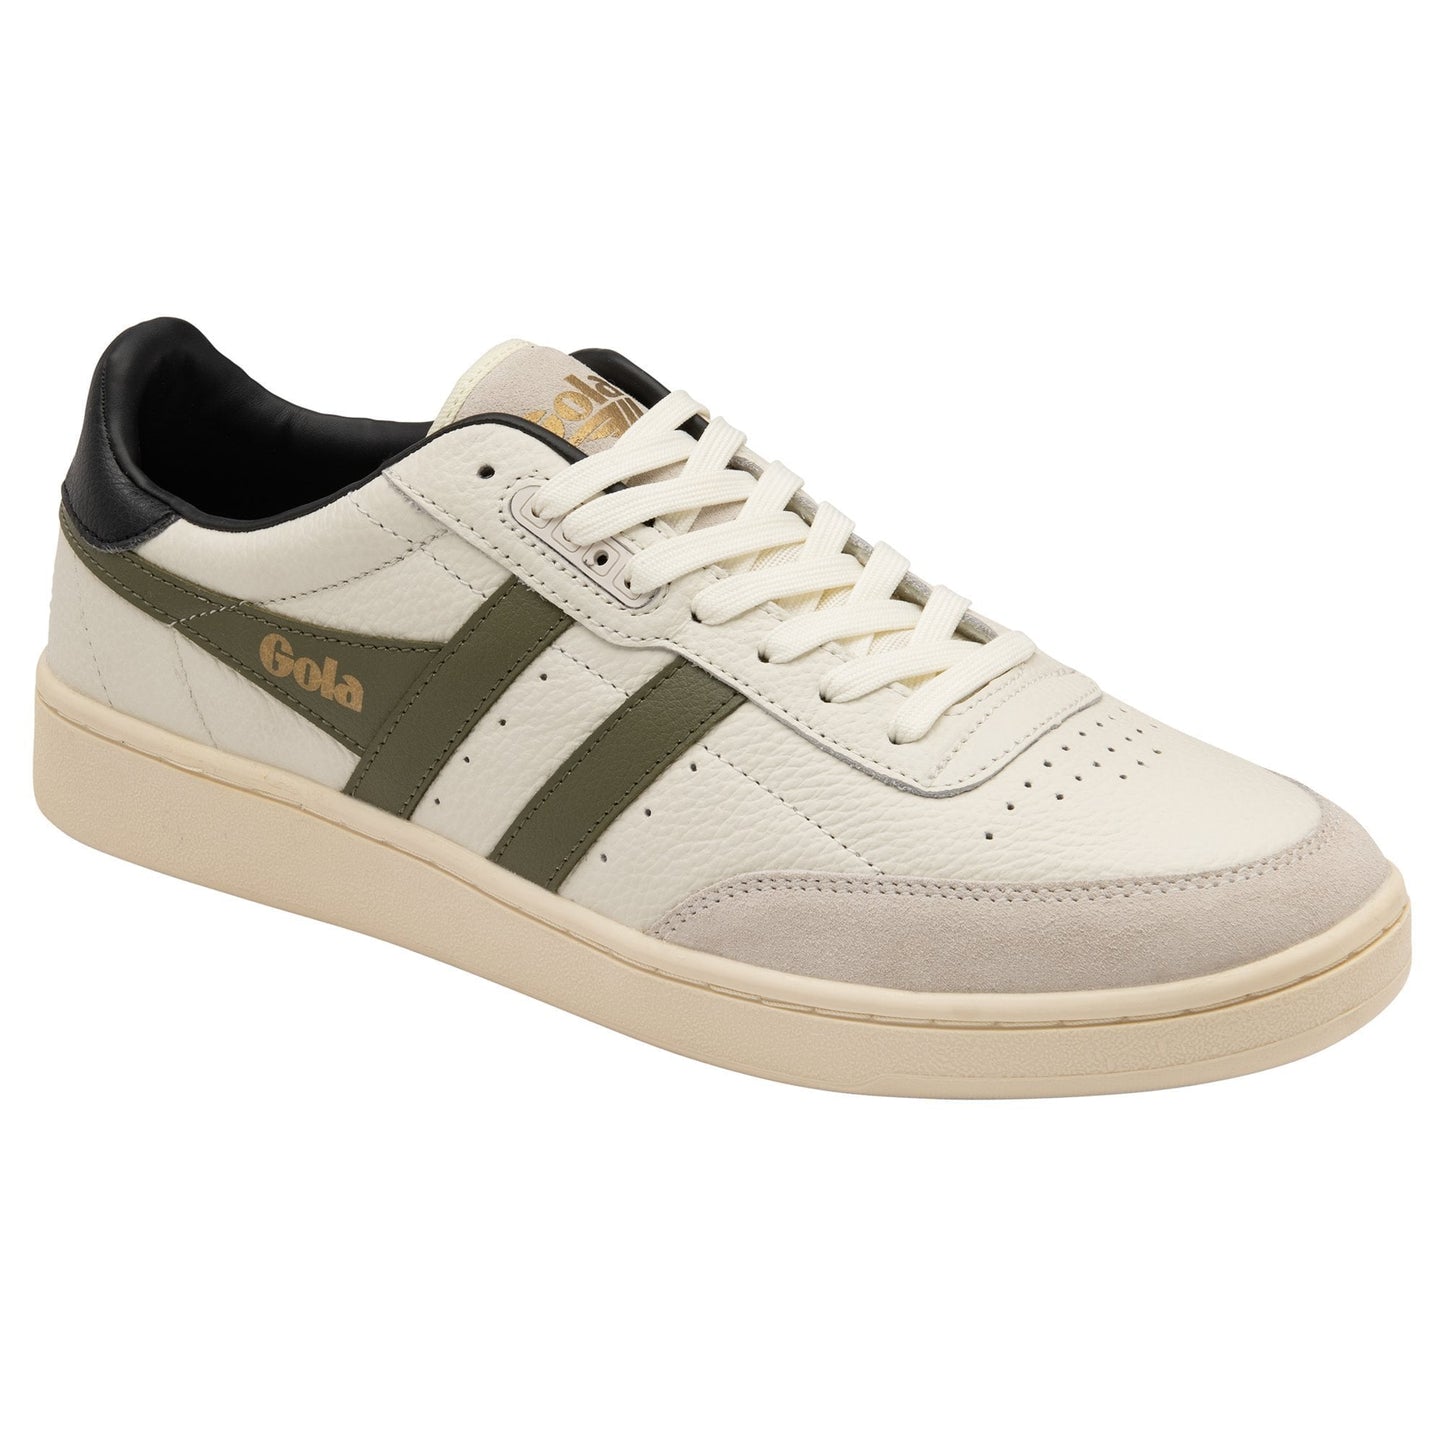 GOLA CONTACT MEN'S LEATHER SNEAKERS - OW/KHK/BLK